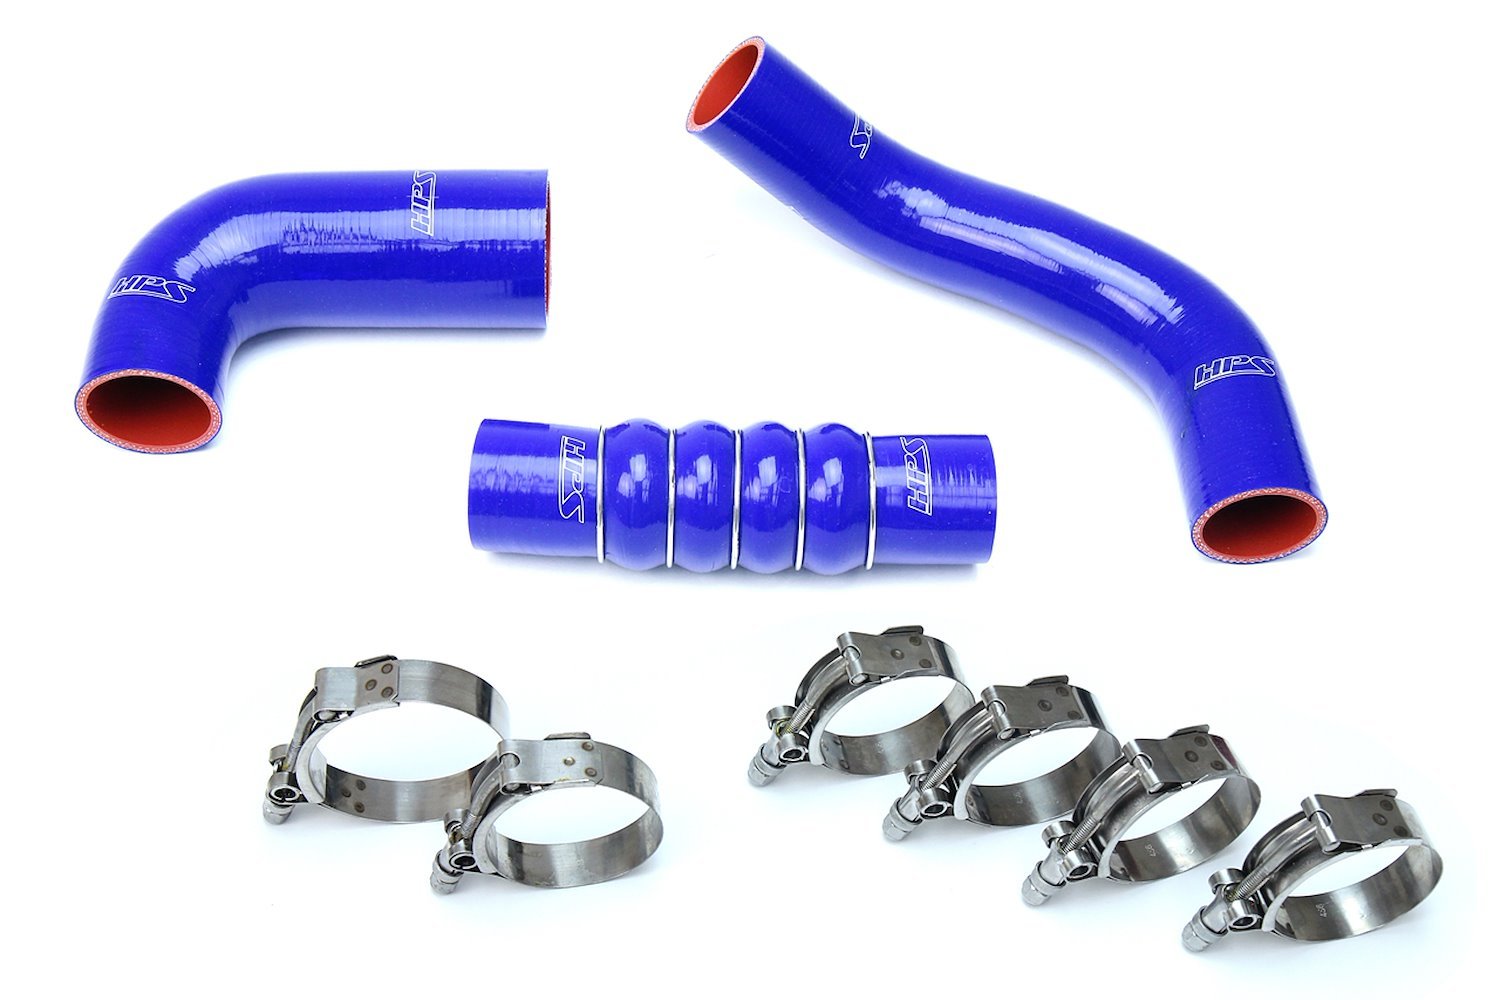 57-1599-BLUE Intercooler Hose Kit, High-Temp 4-Ply Reinforced Silicone, Replace OEM Rubber Intercooler Turbo Boots